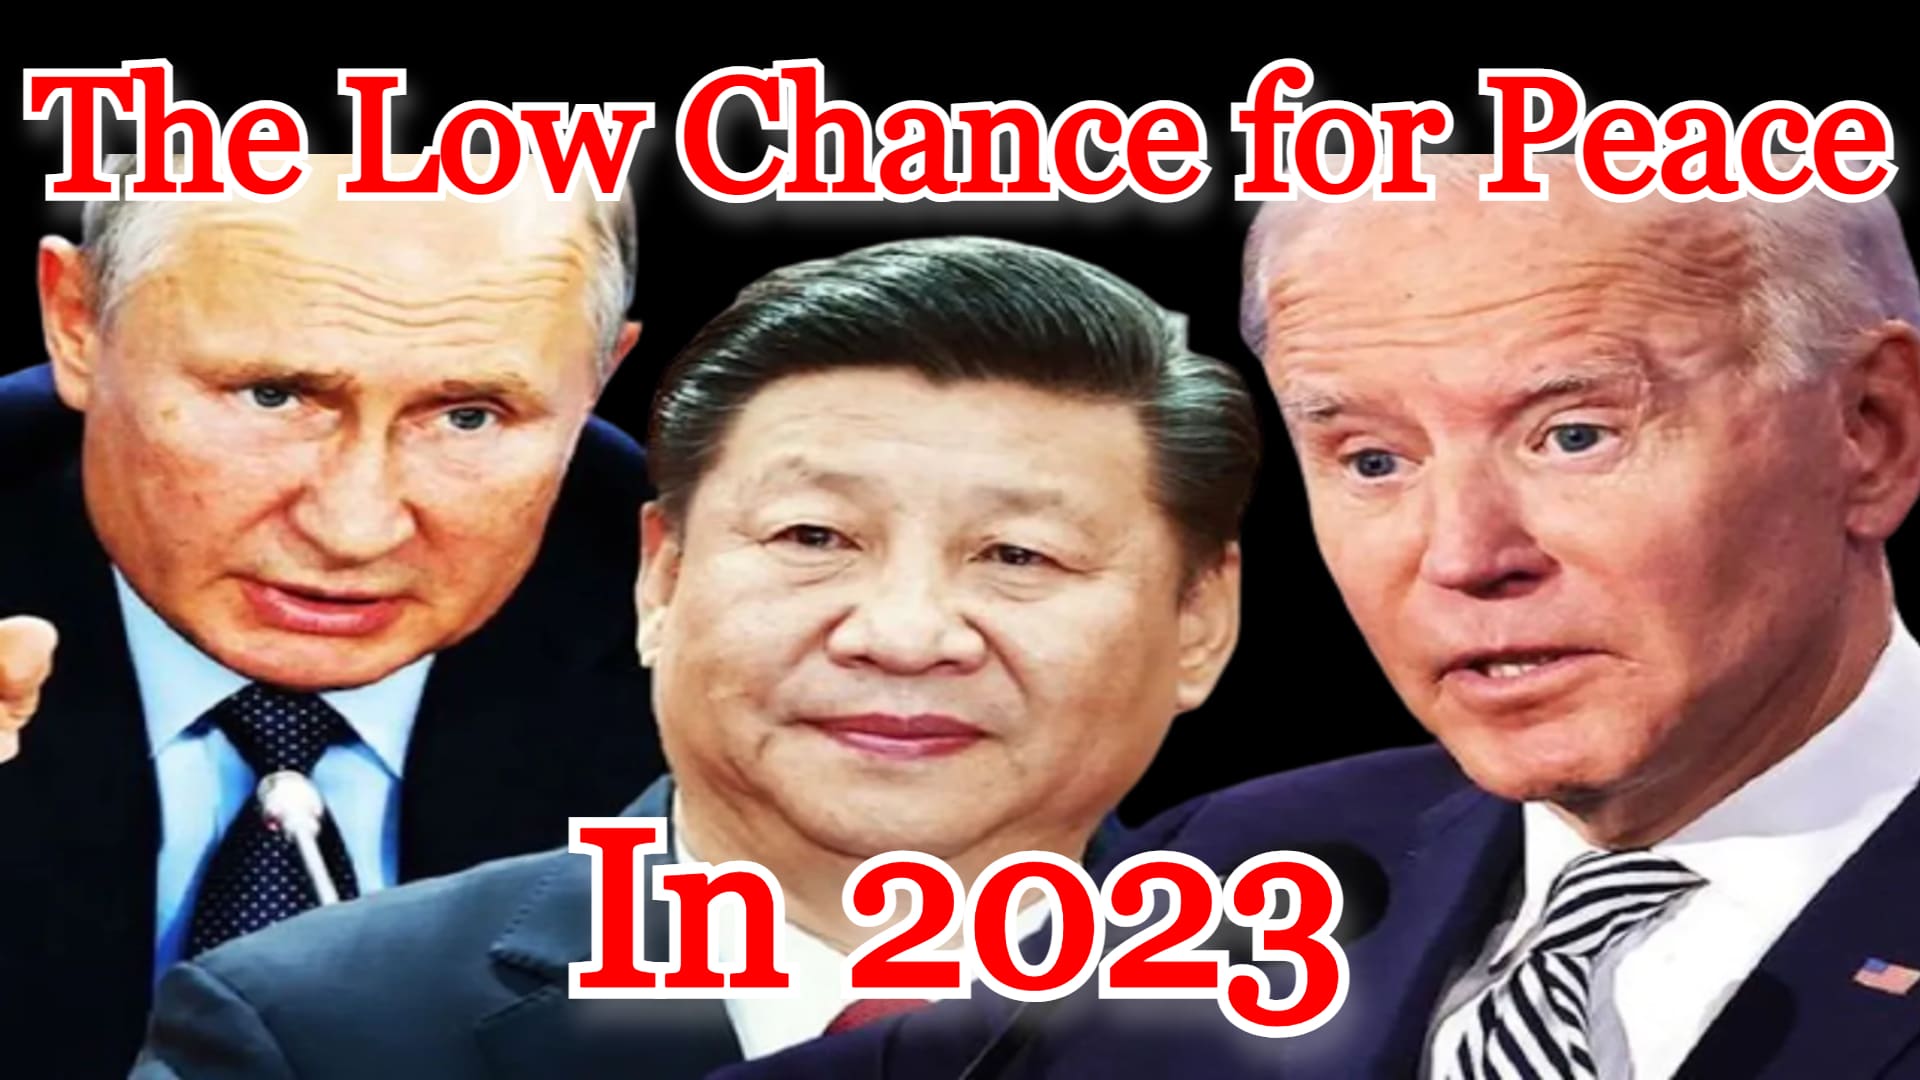 COI #368: The Low Chance for Peace in 2023